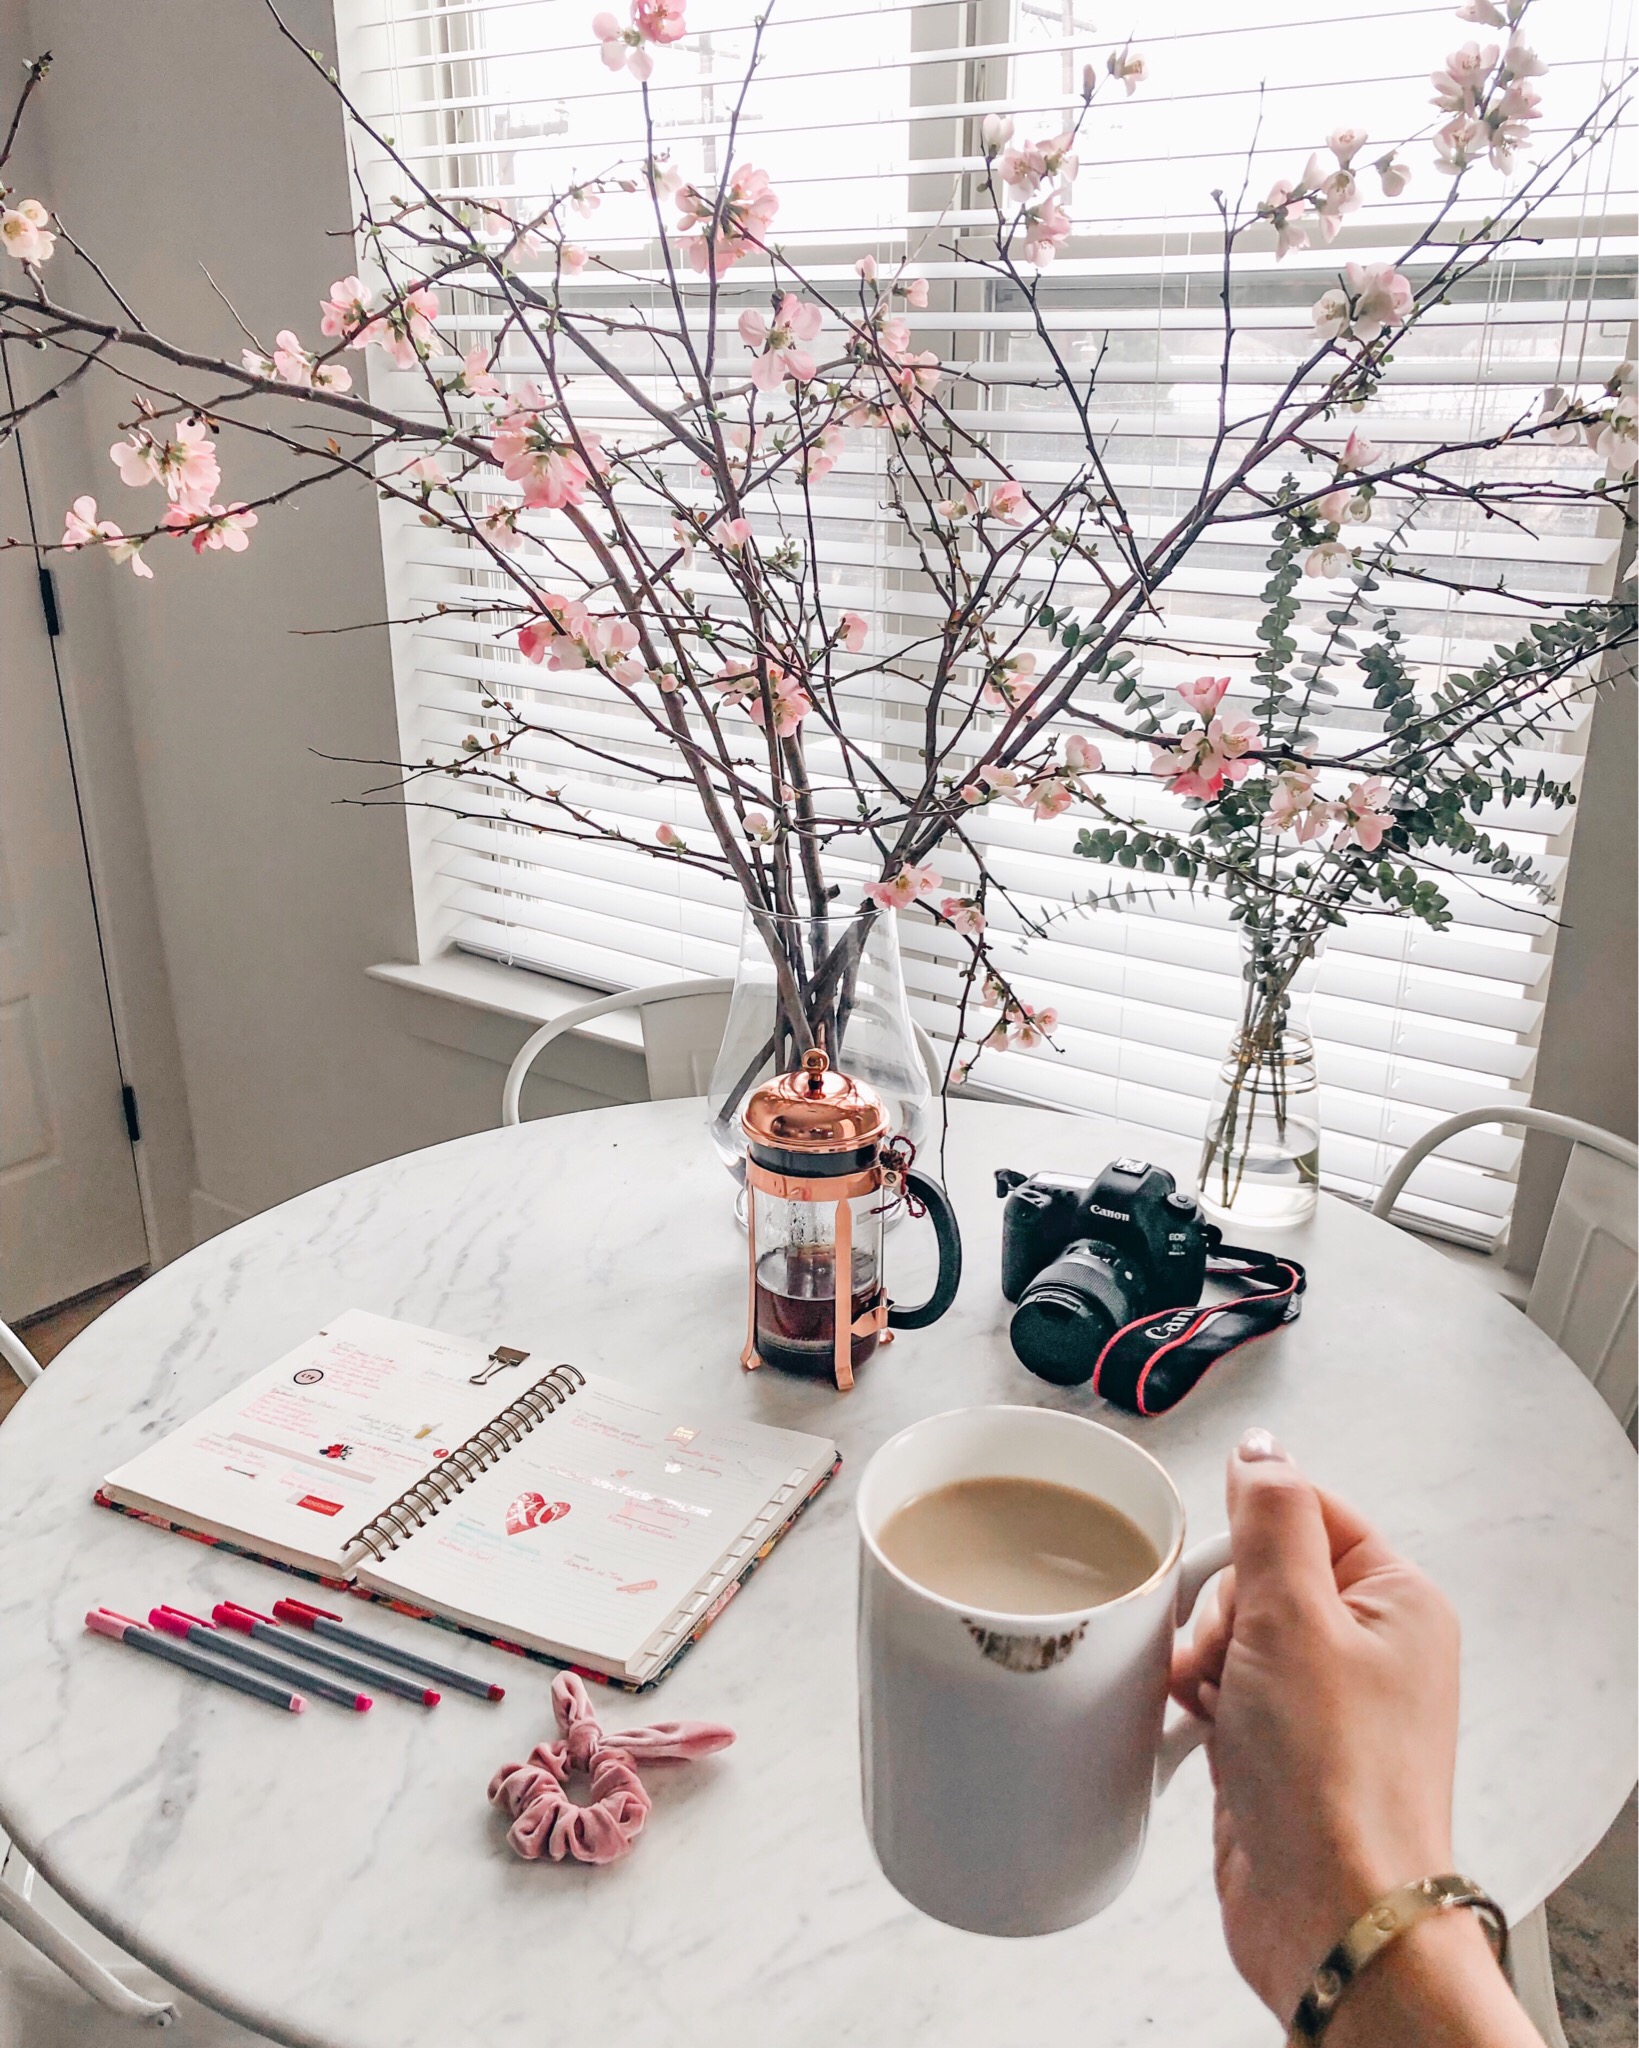 Blogger Hoang-Kim shares her dining room decor with peach blossoms